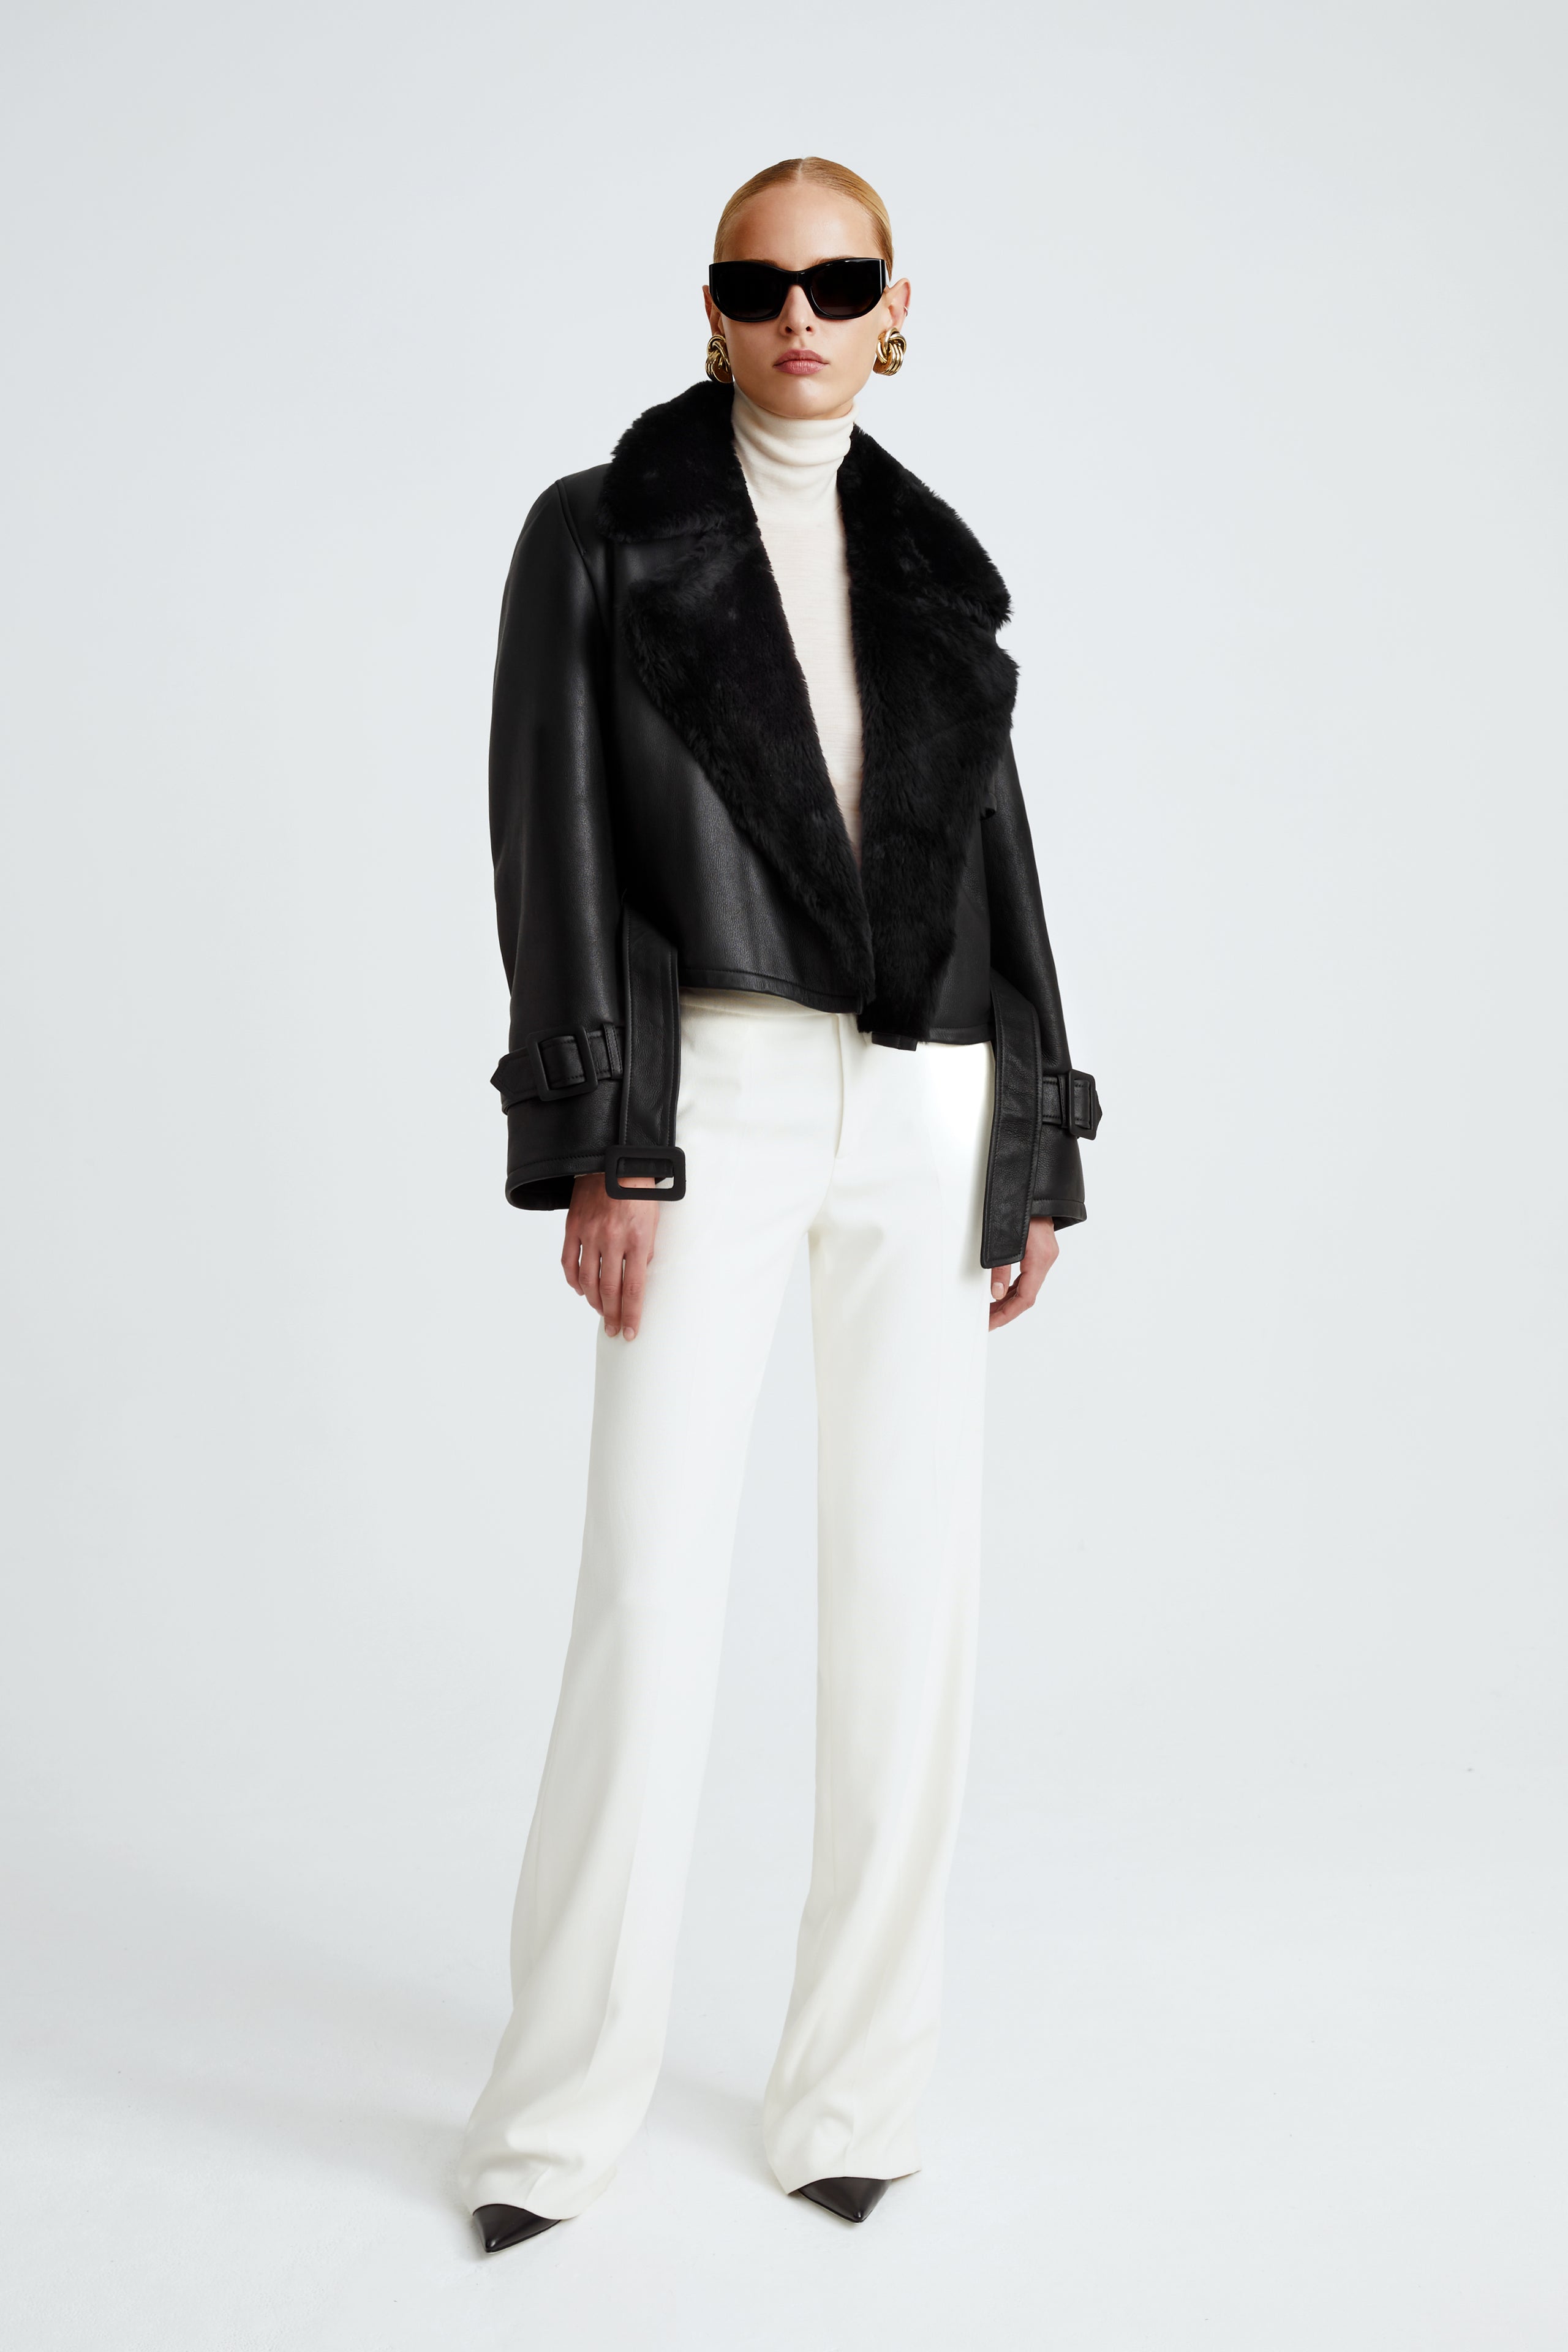 Model is wearing the Hatti Shearling Black Cropped Shearling Jacket Front